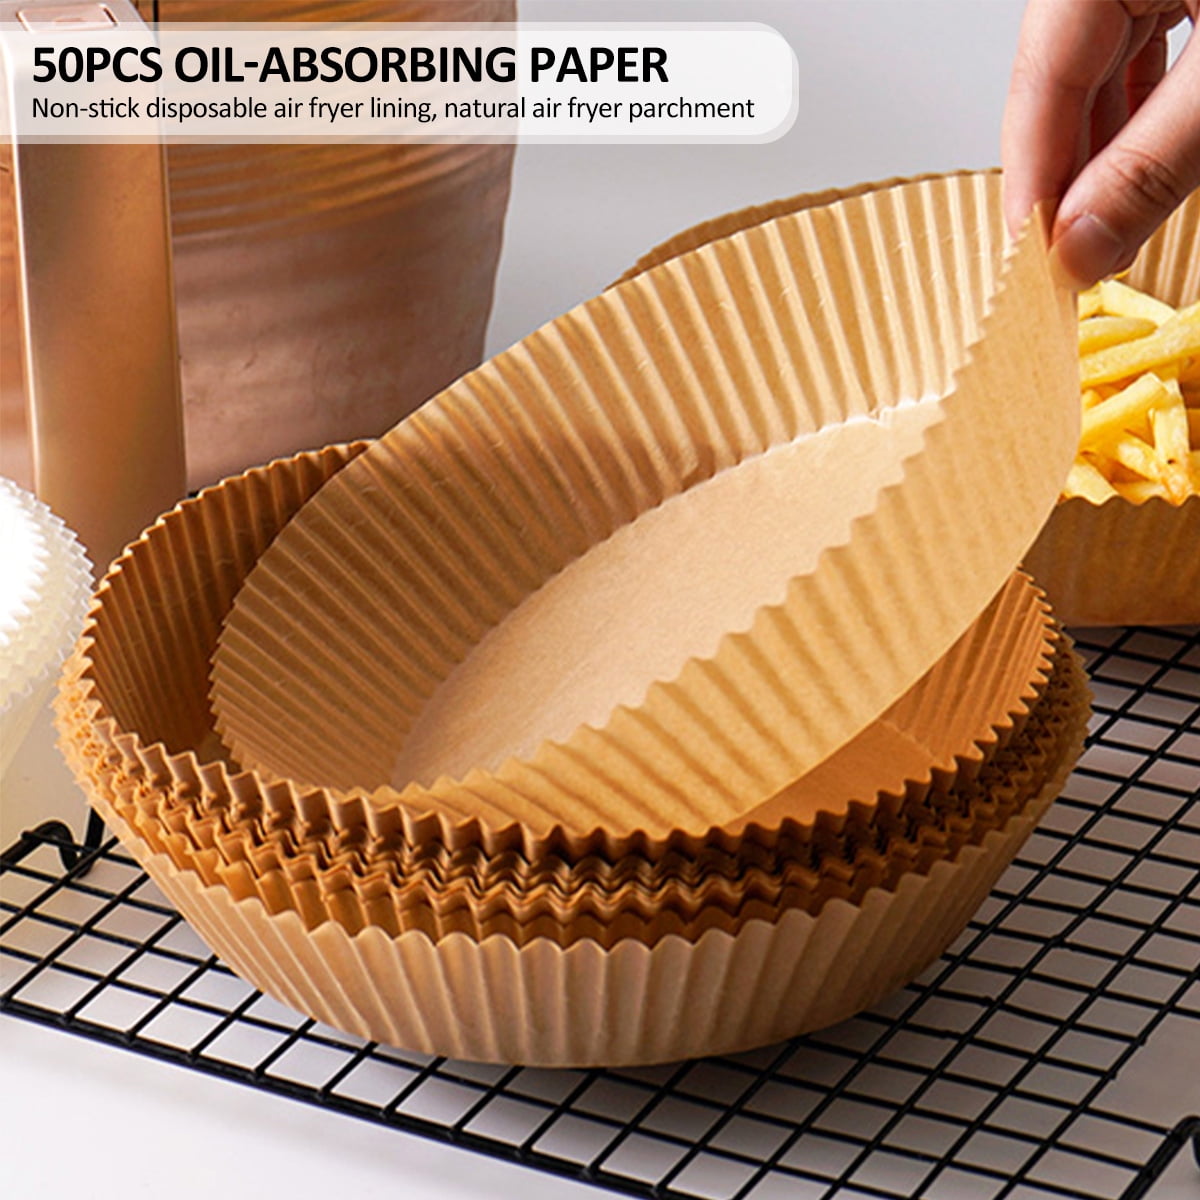 Air Fryer Liners 8 Inch,125Pcs Premium Food Grade Parchment Paper, Air  Fryer Disposable Paper Liner for Air Frying, Baking, Roasting Microwave